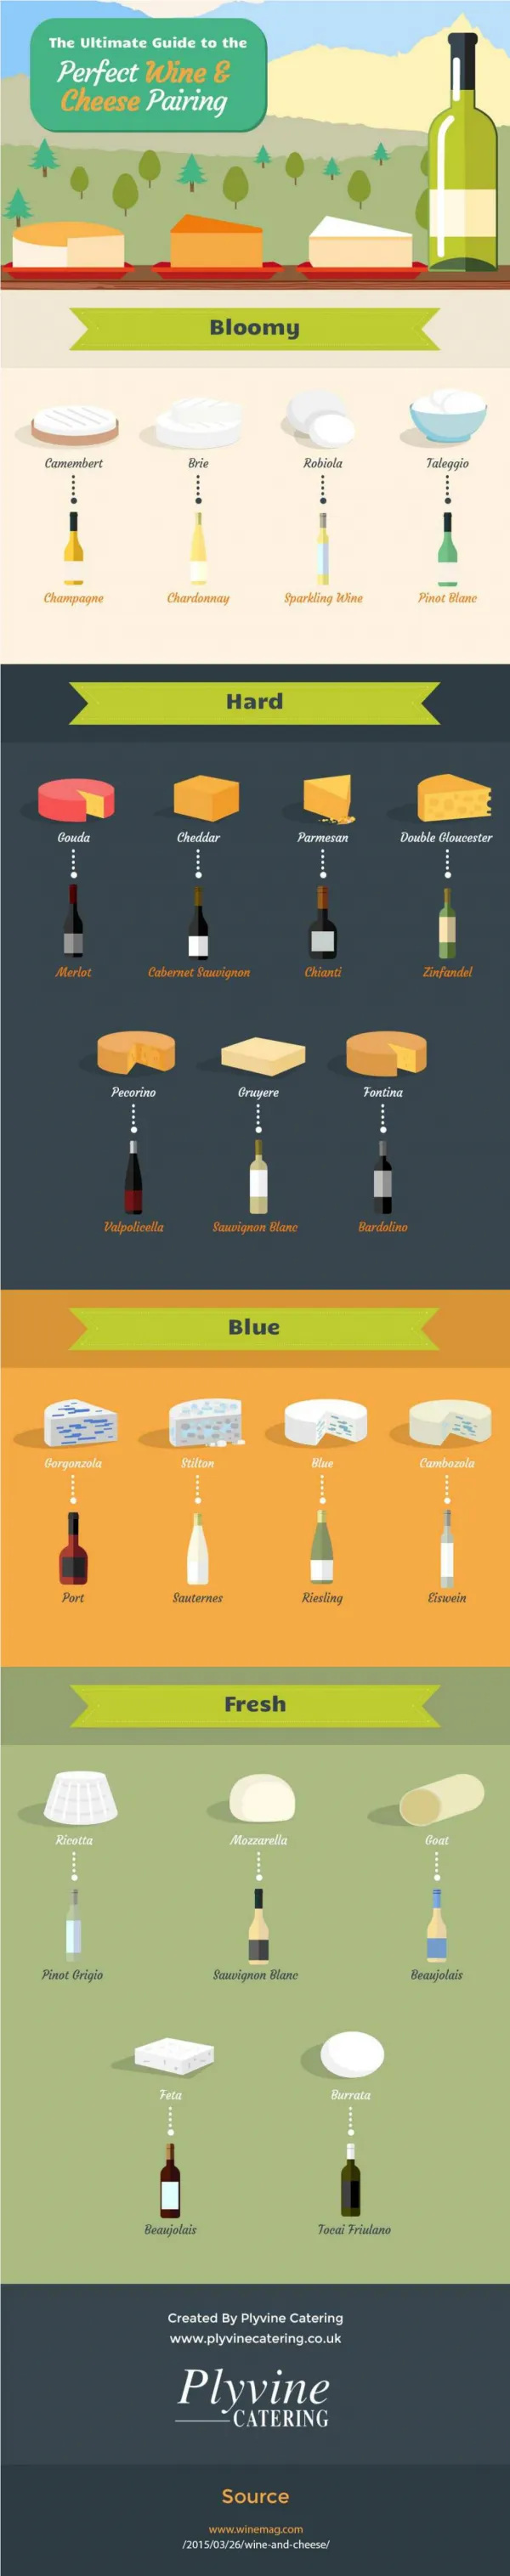 The Ultimate Guide to the Perfect Wine & Cheese Pairing